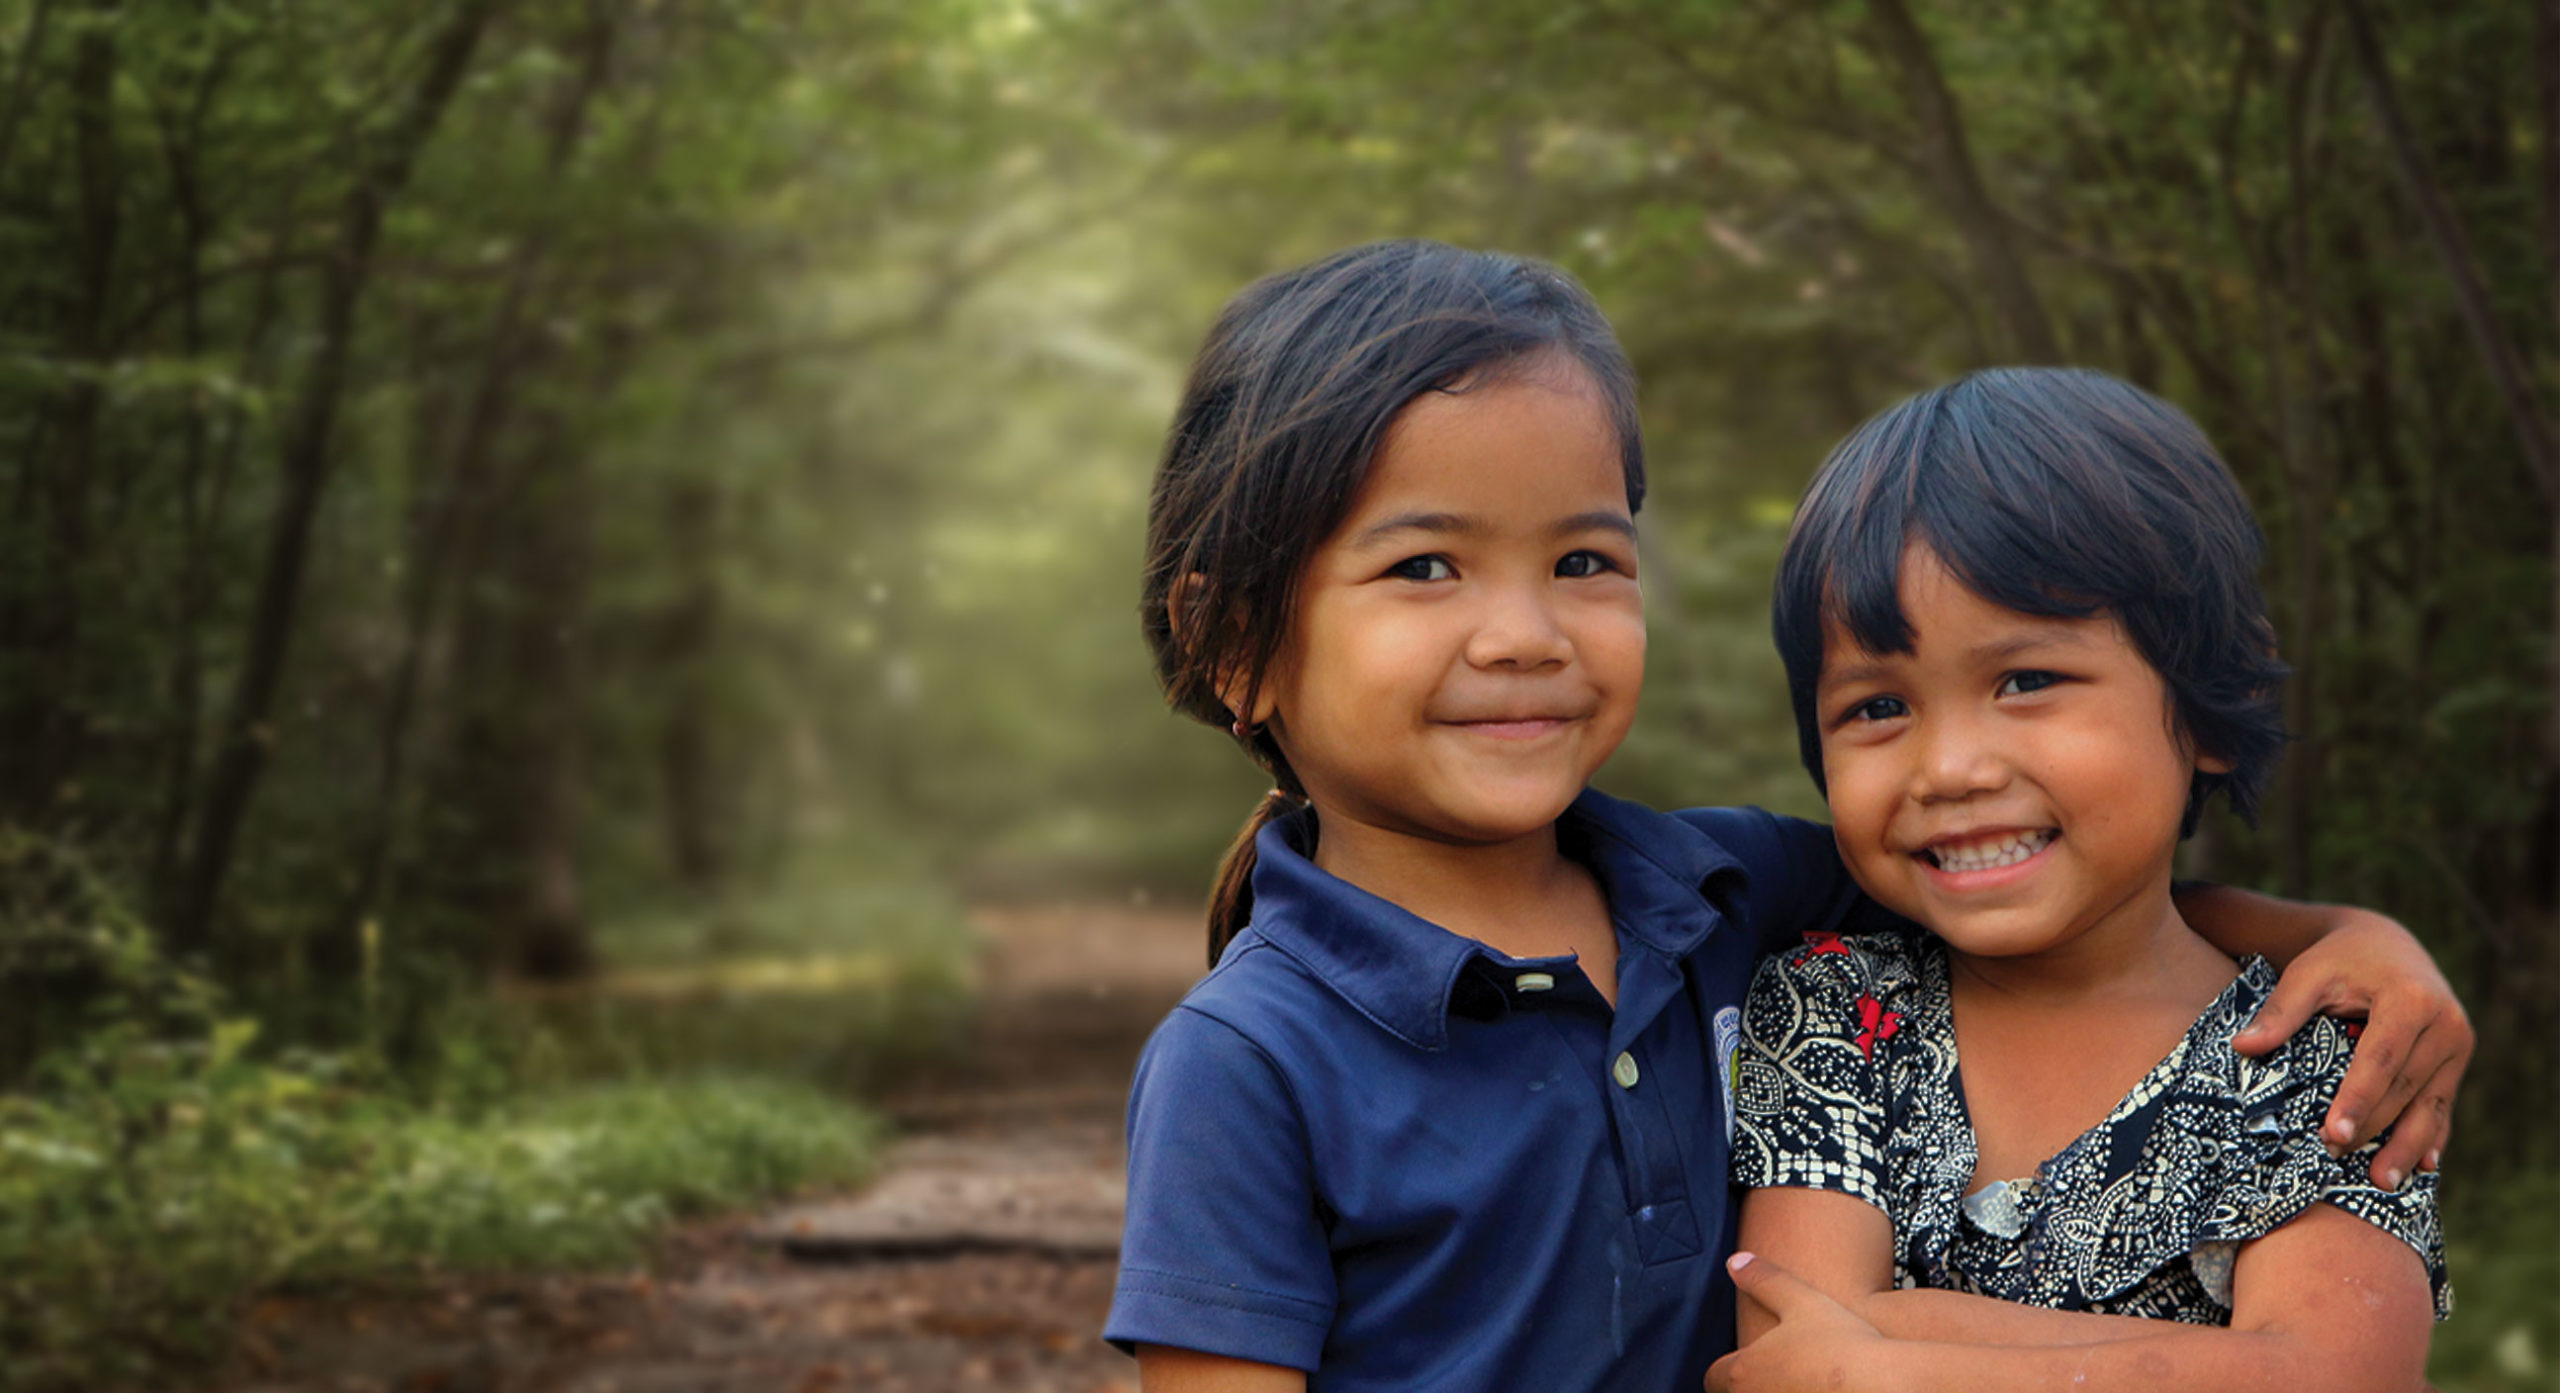 Two impoverished little girls with smiling faces on a jungle path